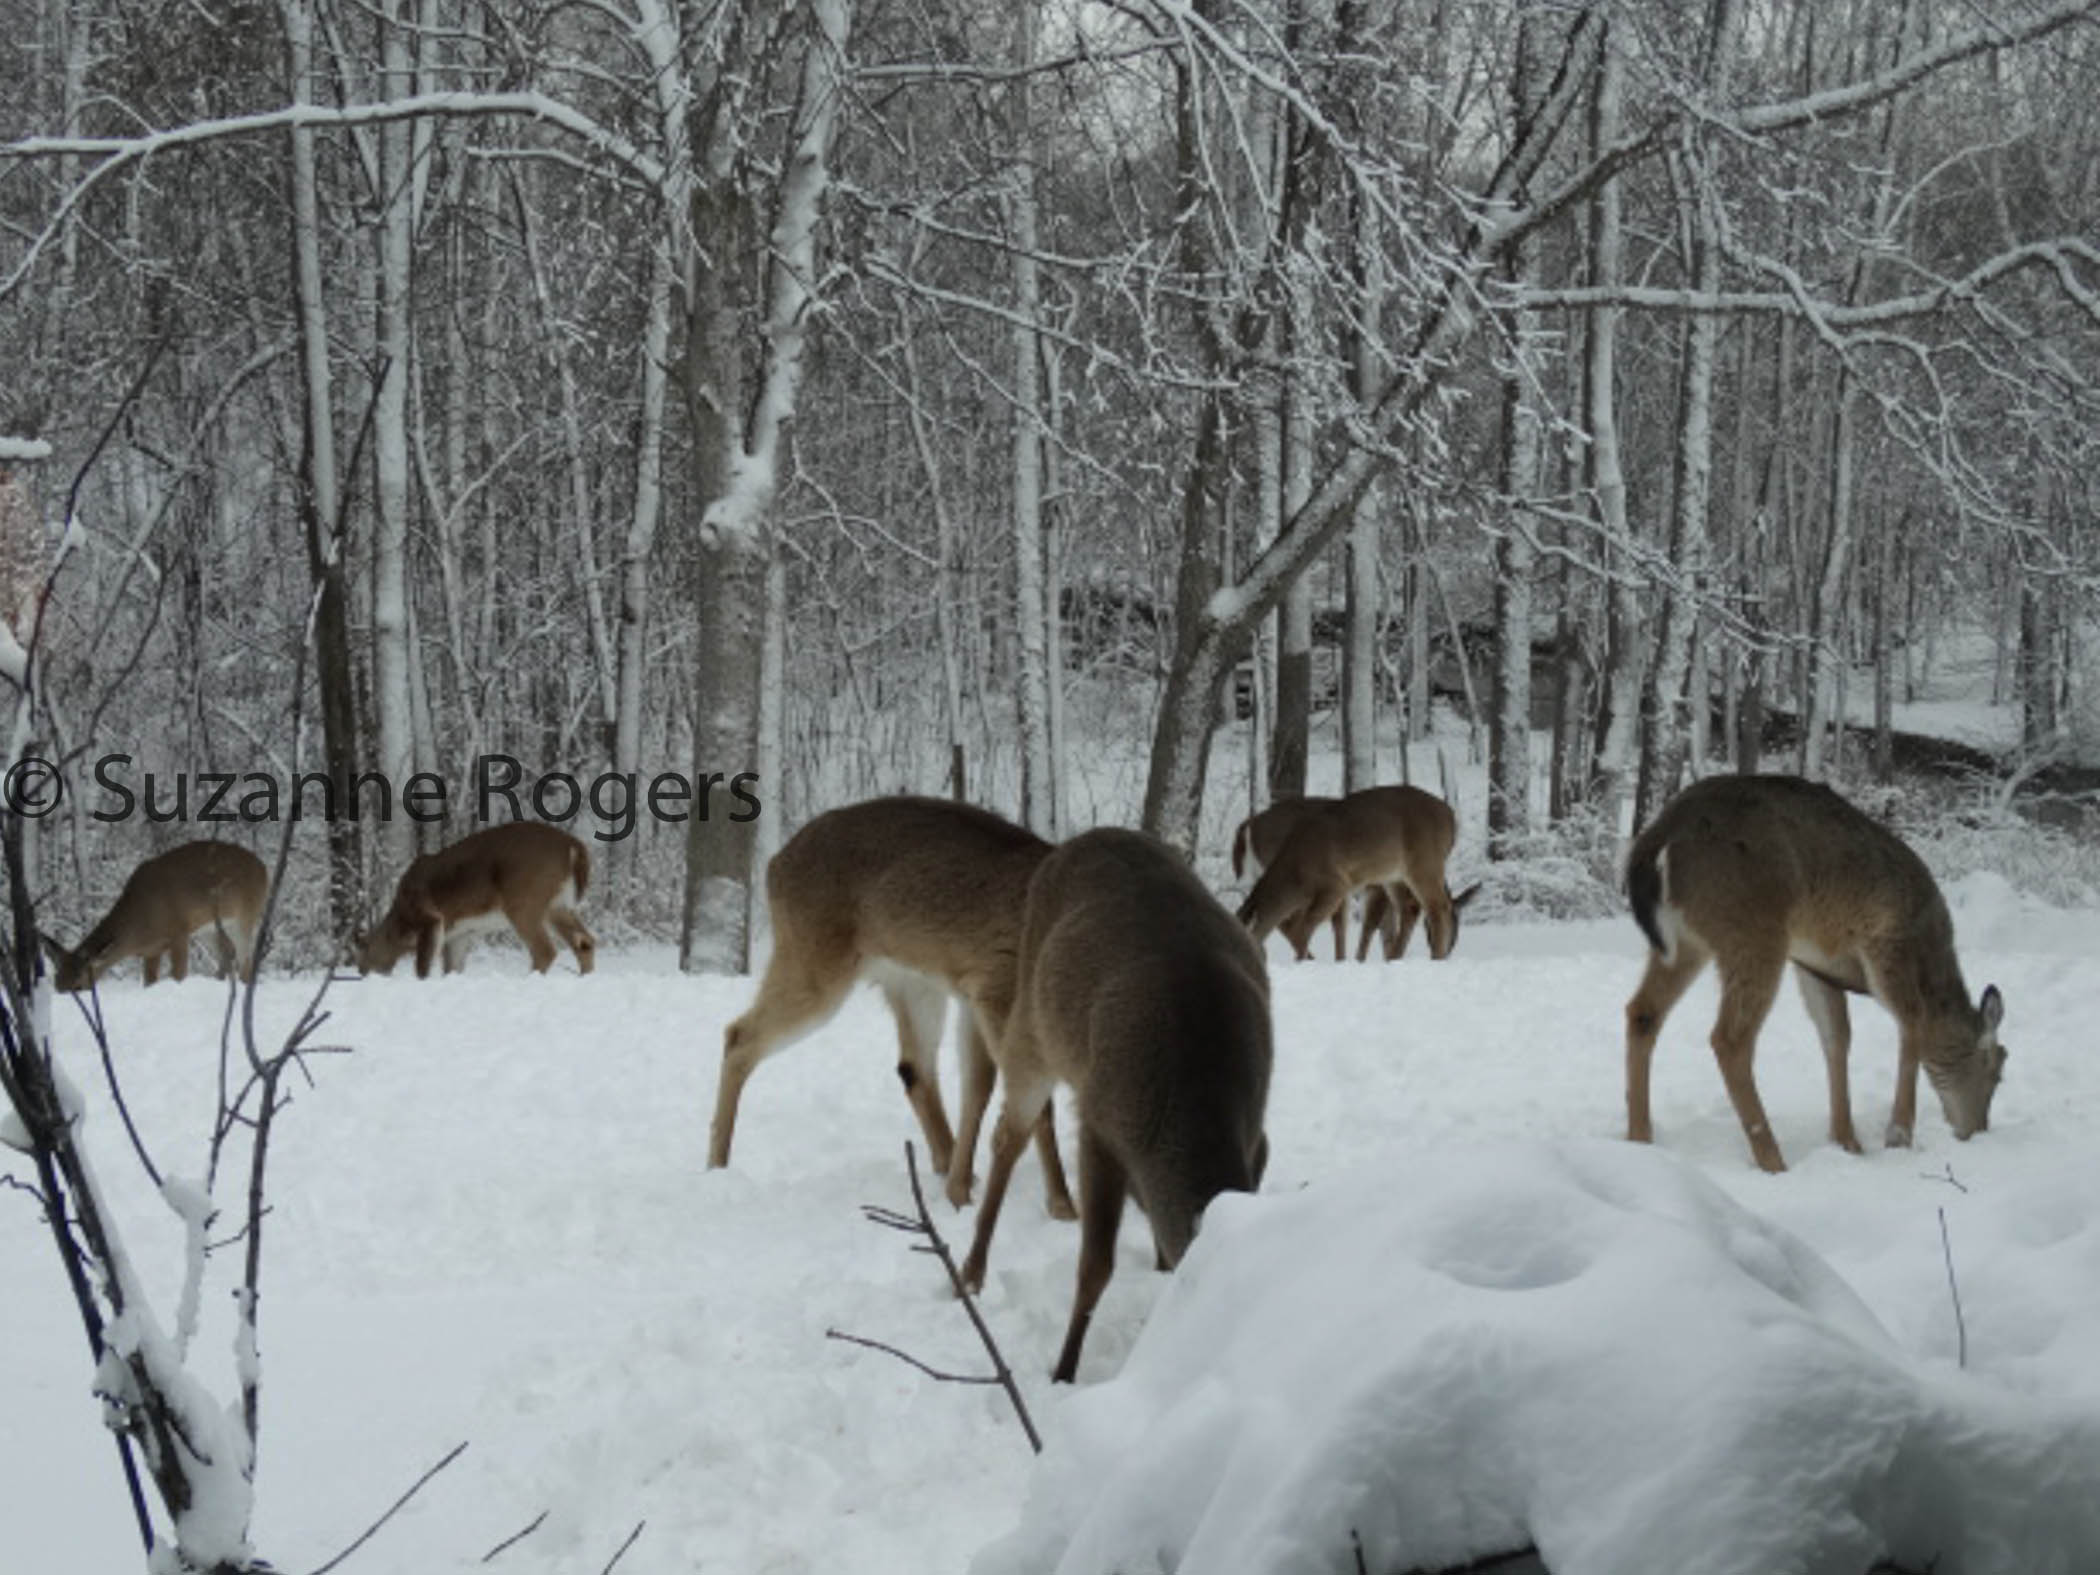 THE HERD OF THE RELENTLESS LATE WINTER 2014 (1 of 1)